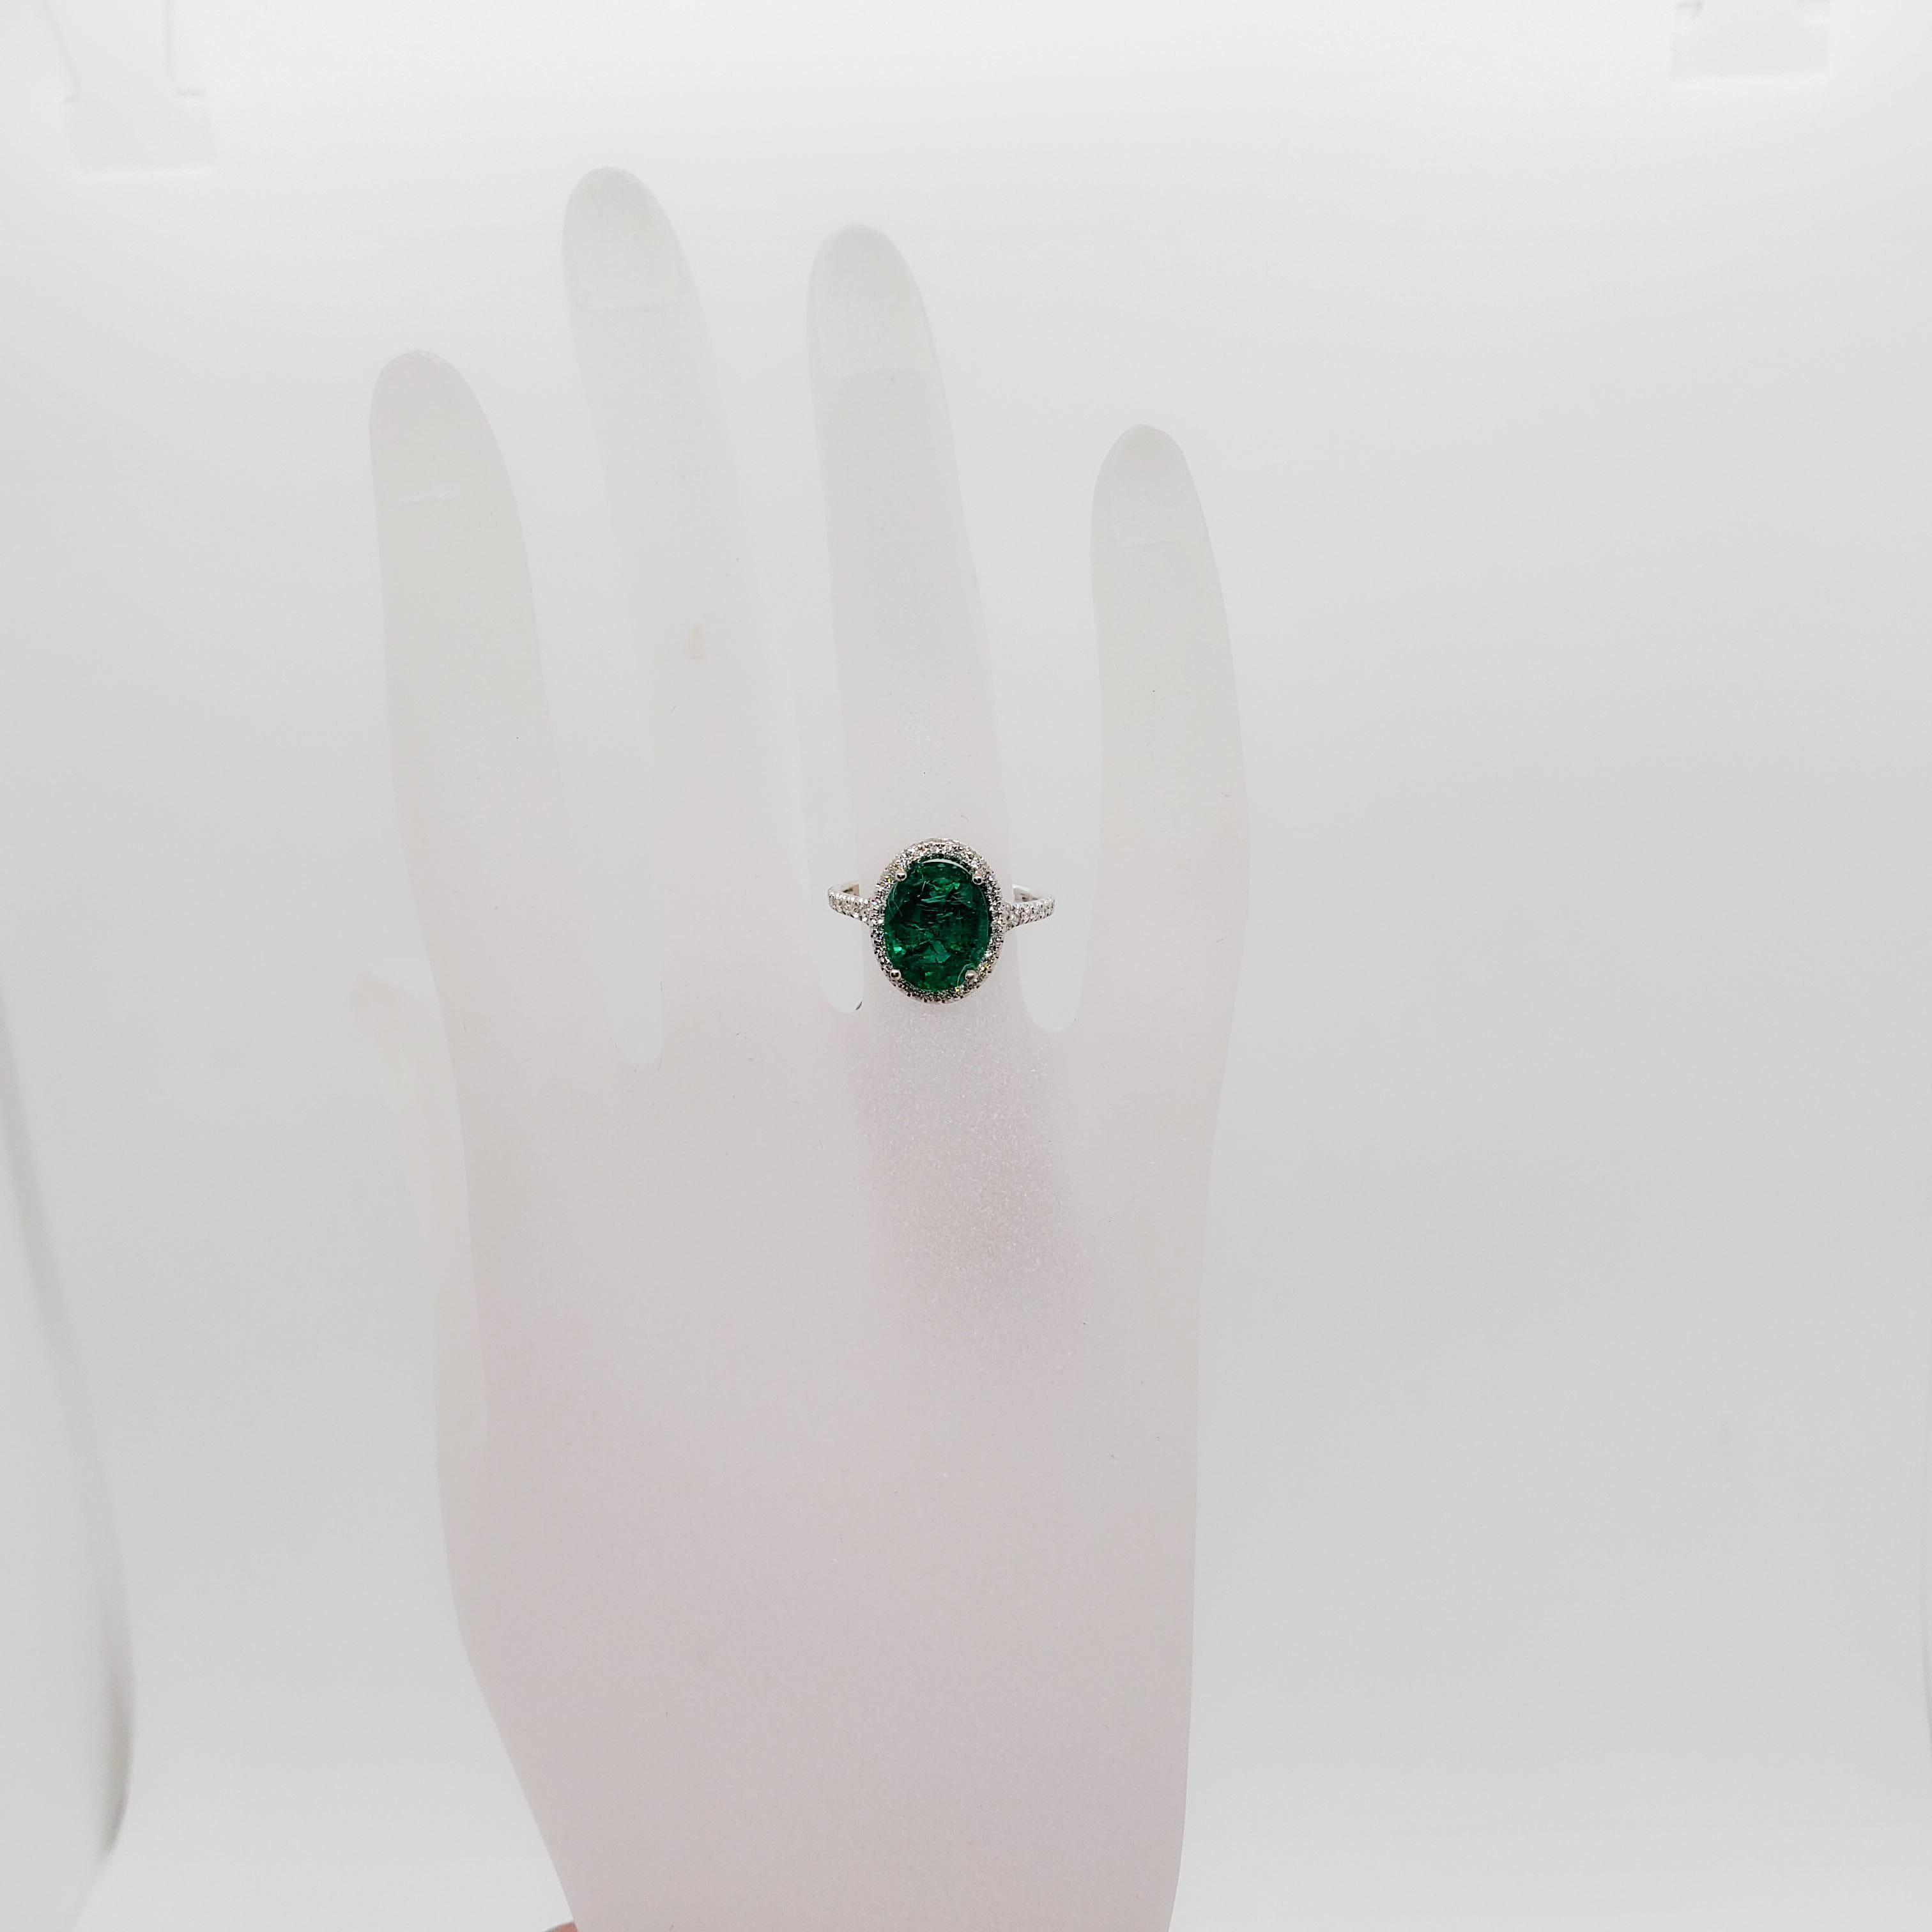 Absolutely stunning perfect green emerald oval weighing 3.42 ct. with 0.36 ct. of white diamond rounds in a handmade 18k white gold mounting. Ring size is 6.25. This ring is perfect for day or night! Excellent condition.